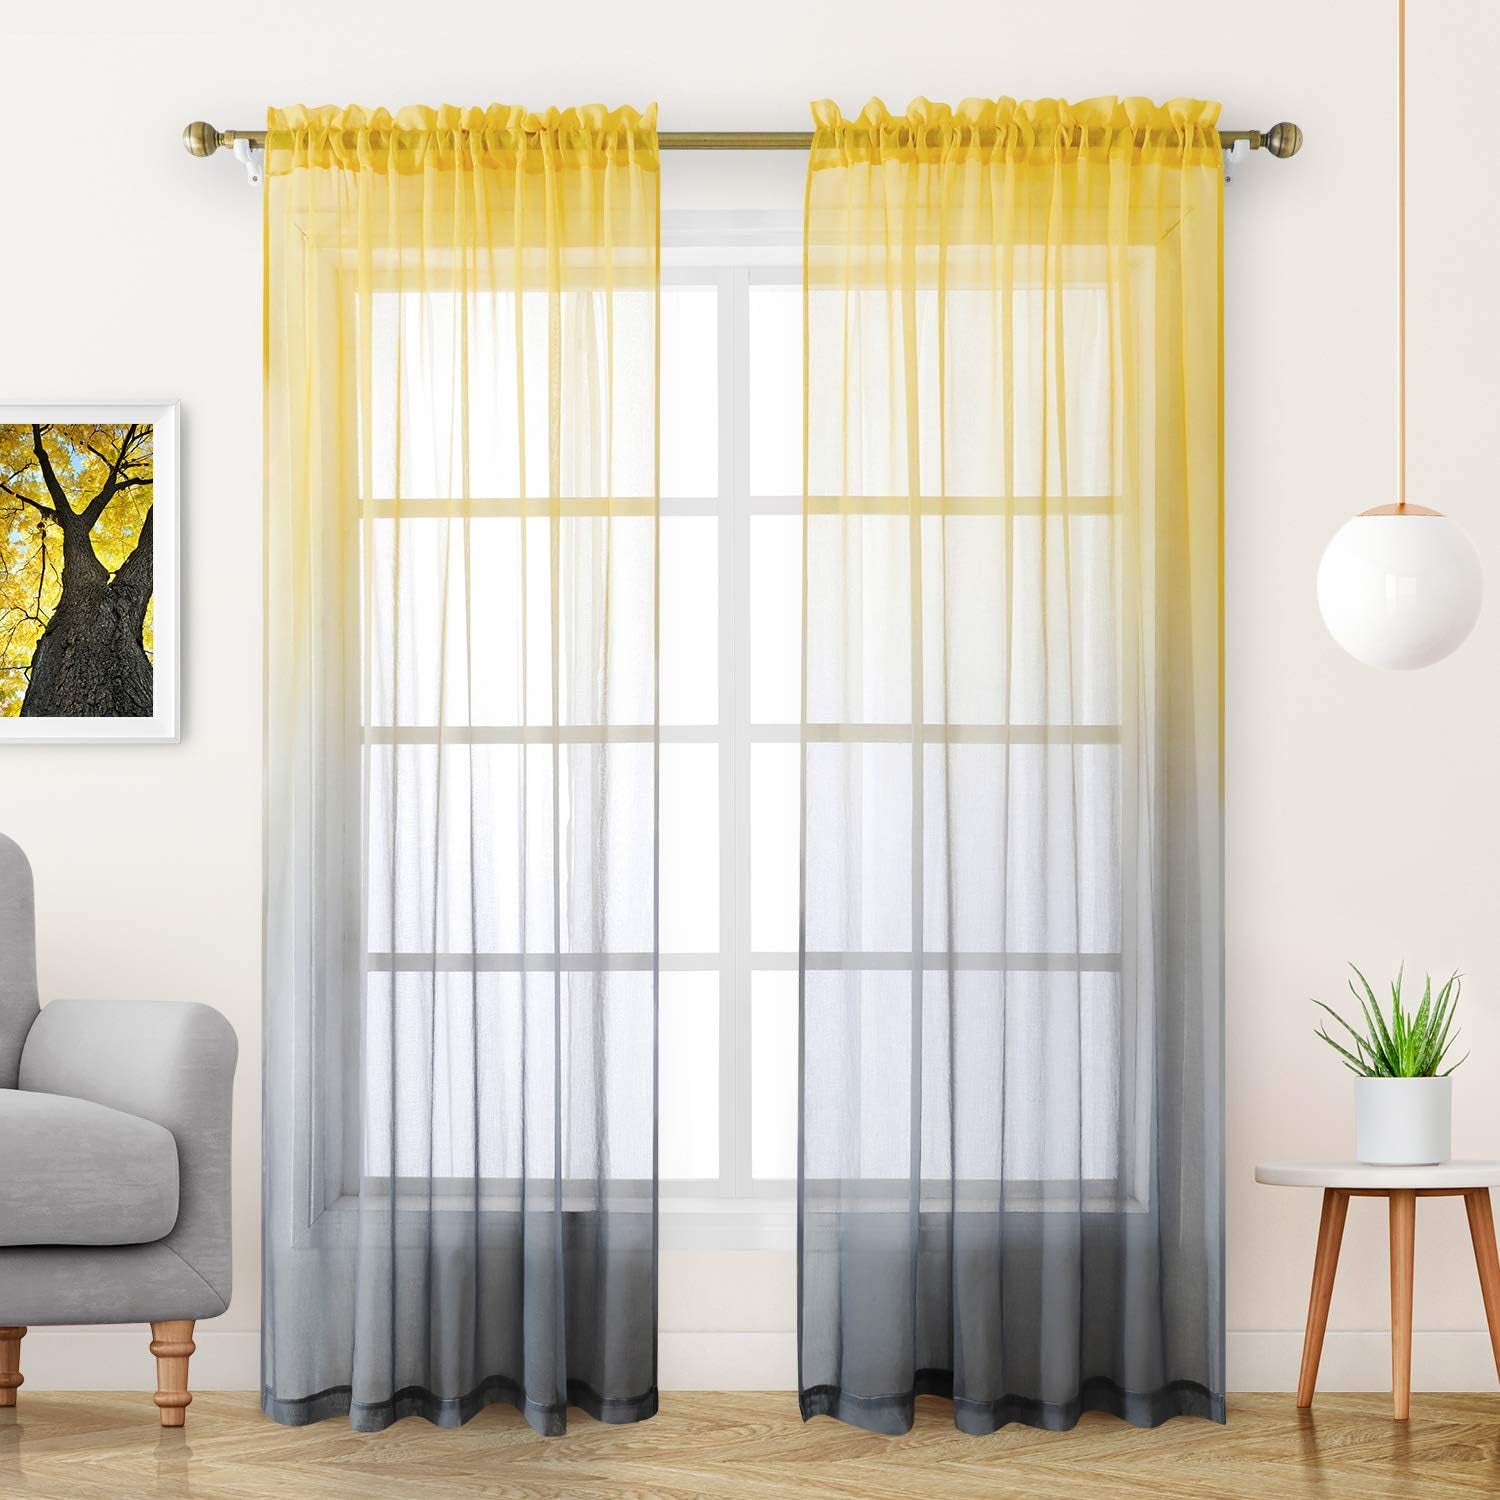 HOMEIDEAS 2 Panels Yellow and Grey Sheer Curtains for Girls Bedroom 52 X 84 Inch, Ombre Linen Curtains Rod Pocket Drapes for Nursery Kids Window and Living Room  HOMEIDEAS Yellow Grey 52"W X 84"L 